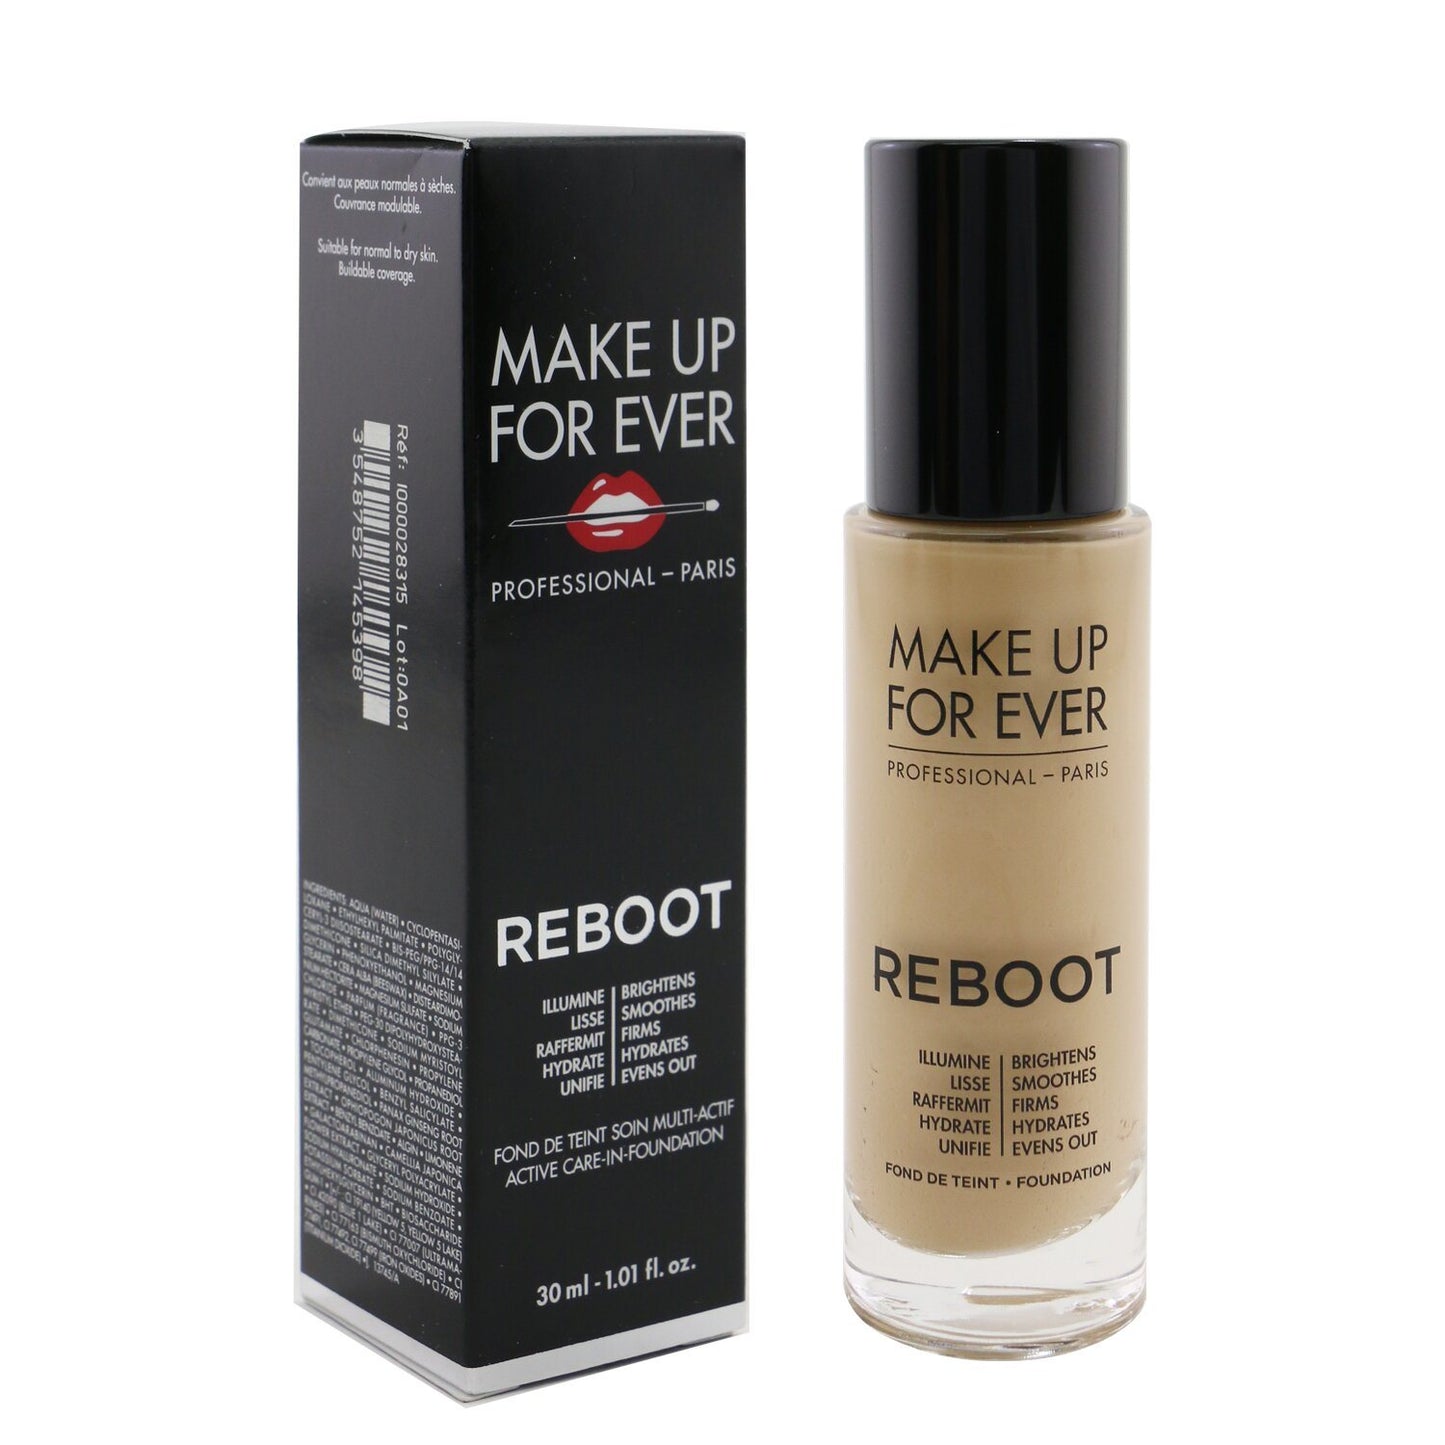 MAKE UP FOR EVER - Reboot Active Care In Foundation - # Y315 Sand 145398 30ml/1.01oz